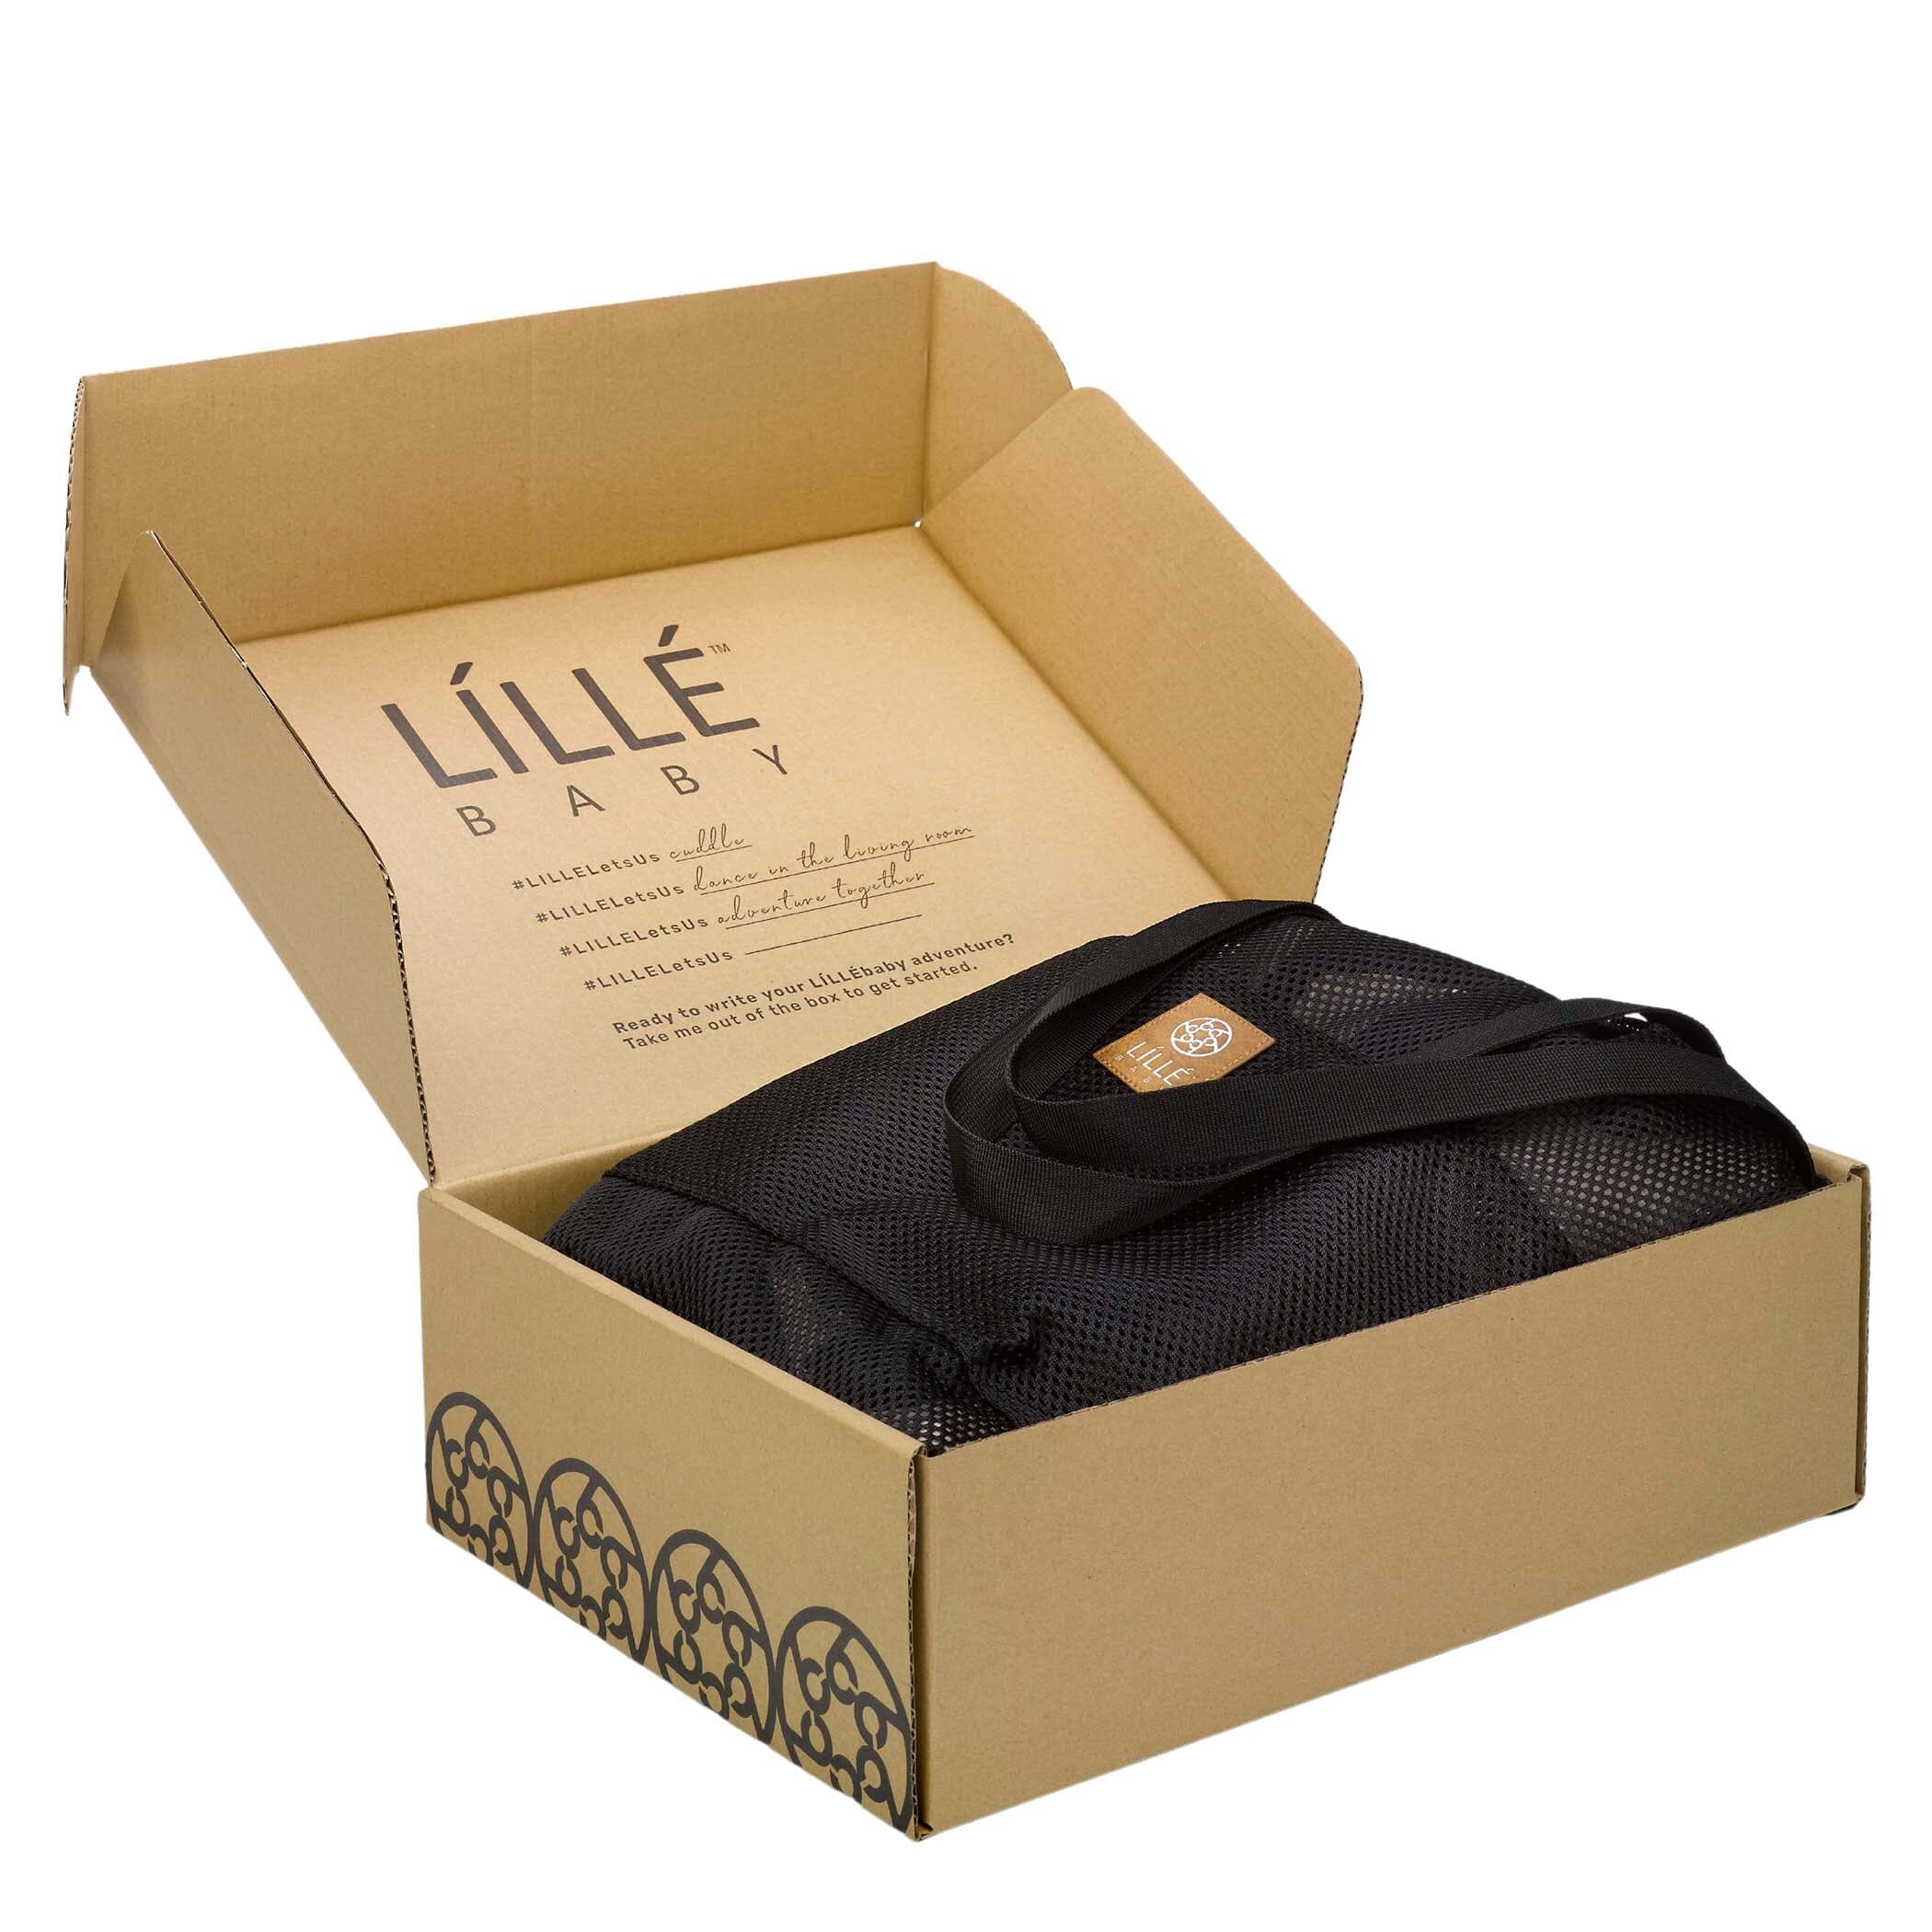 Lillebaby Elevate Carrier comes in a box with a mesh bag